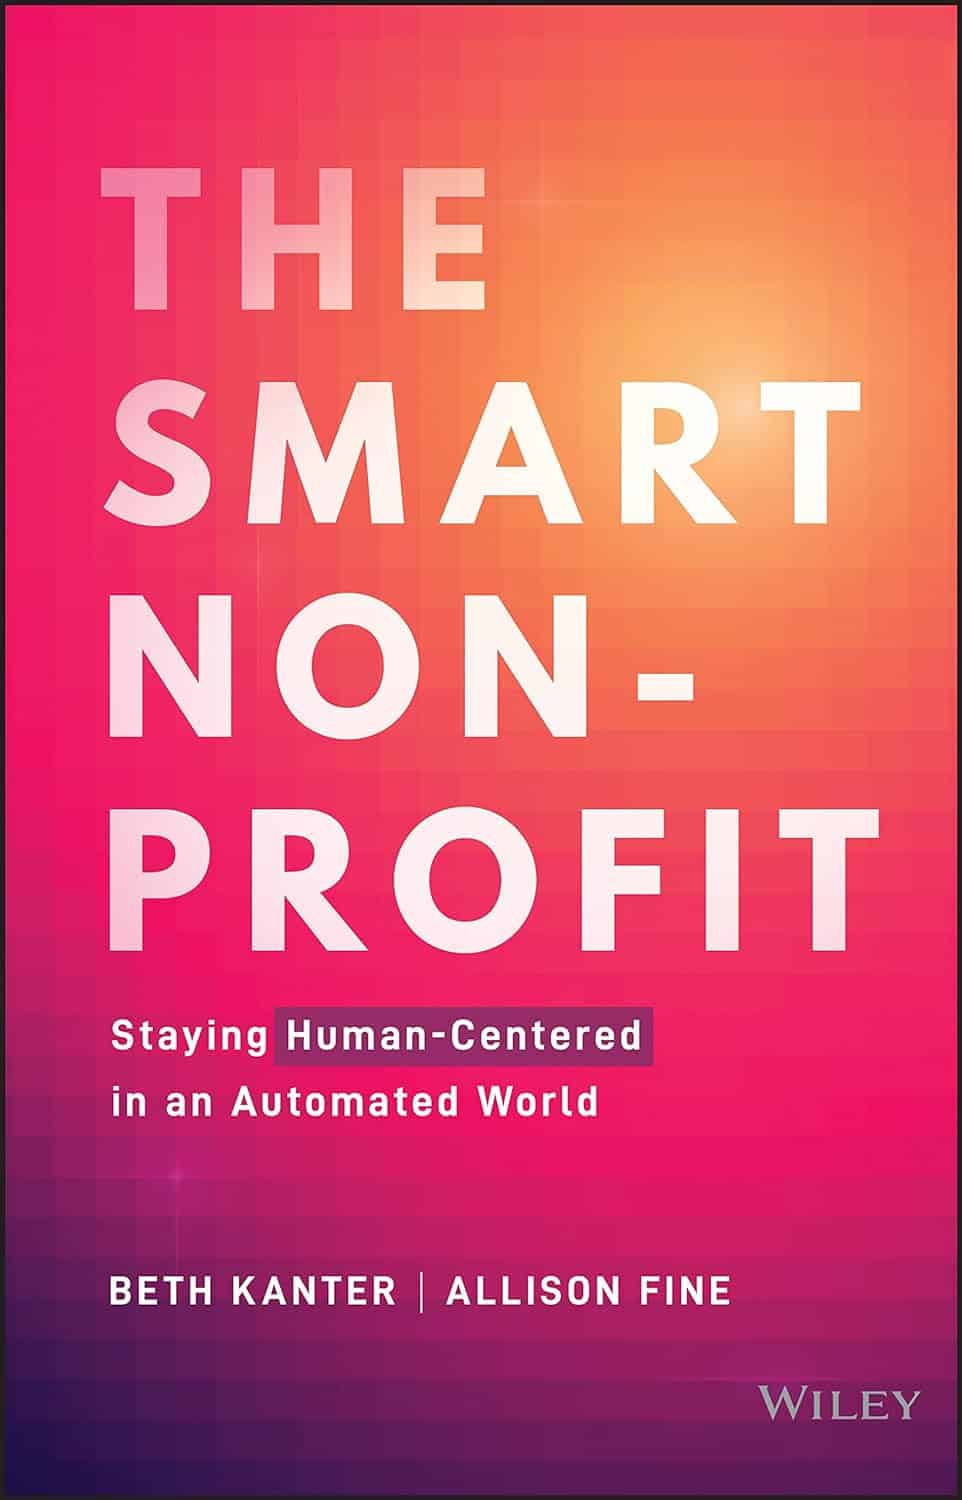 This image is the cover art of The Smart Non-Profit: Staying Human-Centered in an Automated World by Beth Kanter and Allison Fine.